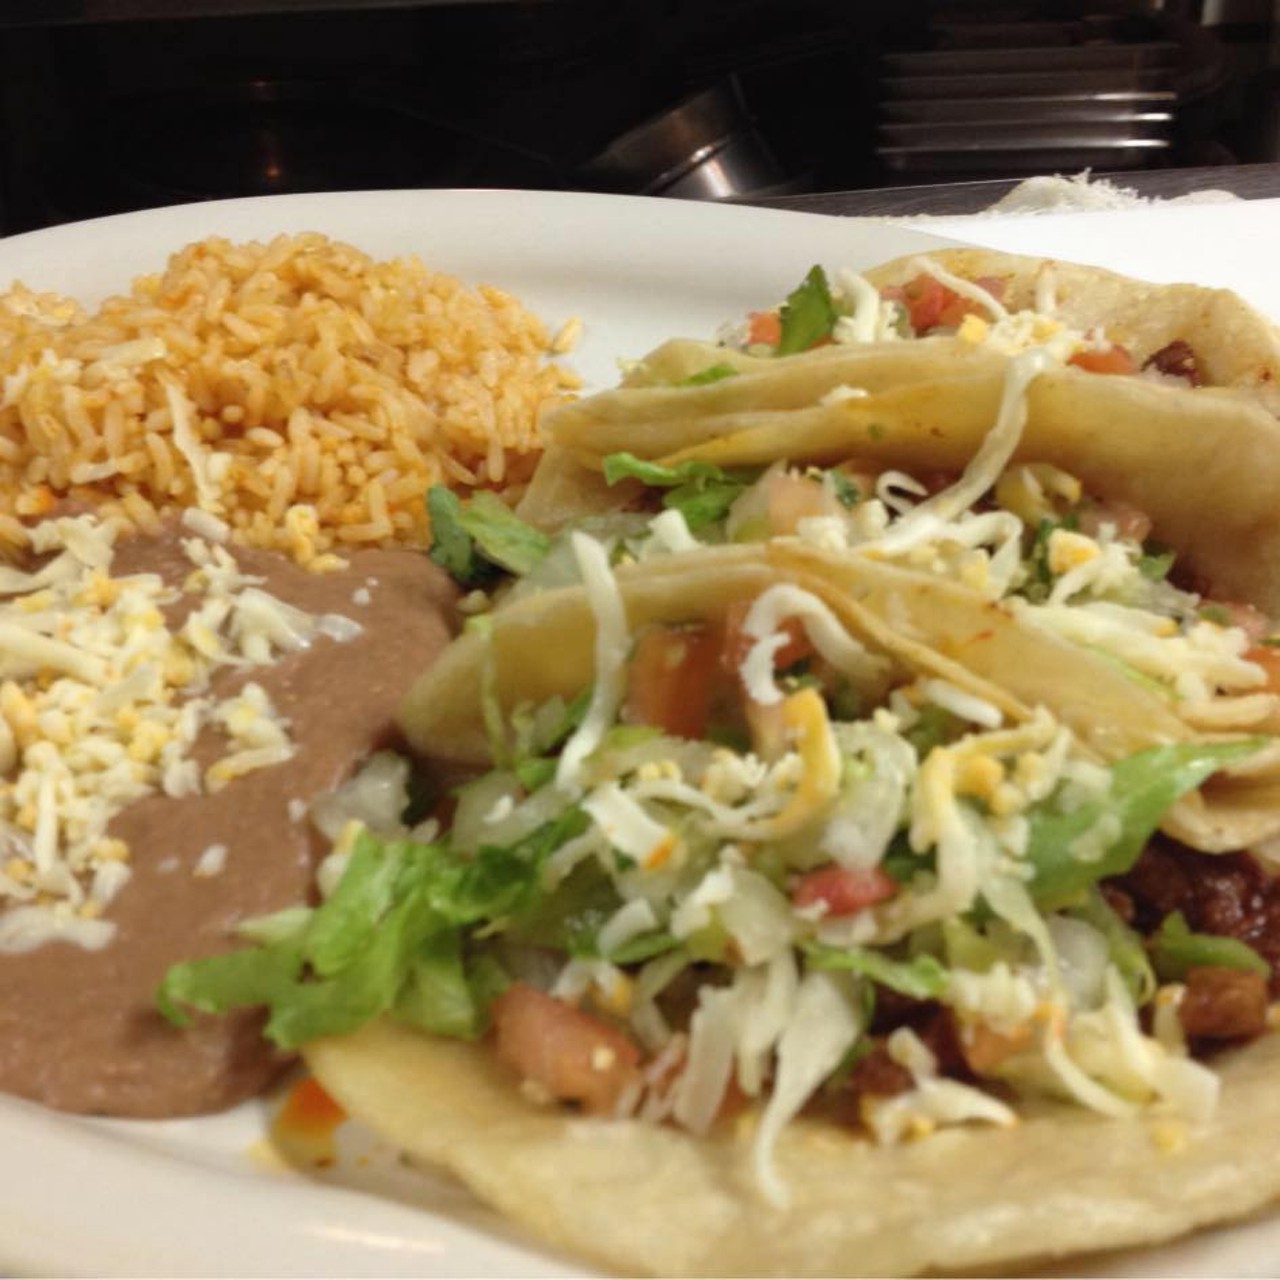  Villa Y Zapata
8505 Madison Ave., Cleveland
But since we&#146;re talking tacos, it&#146;s no surprise Villa does these right. One tip: Don&#146;t skip the delicious quac.
Photo via Villa Y Zapata/Facebook